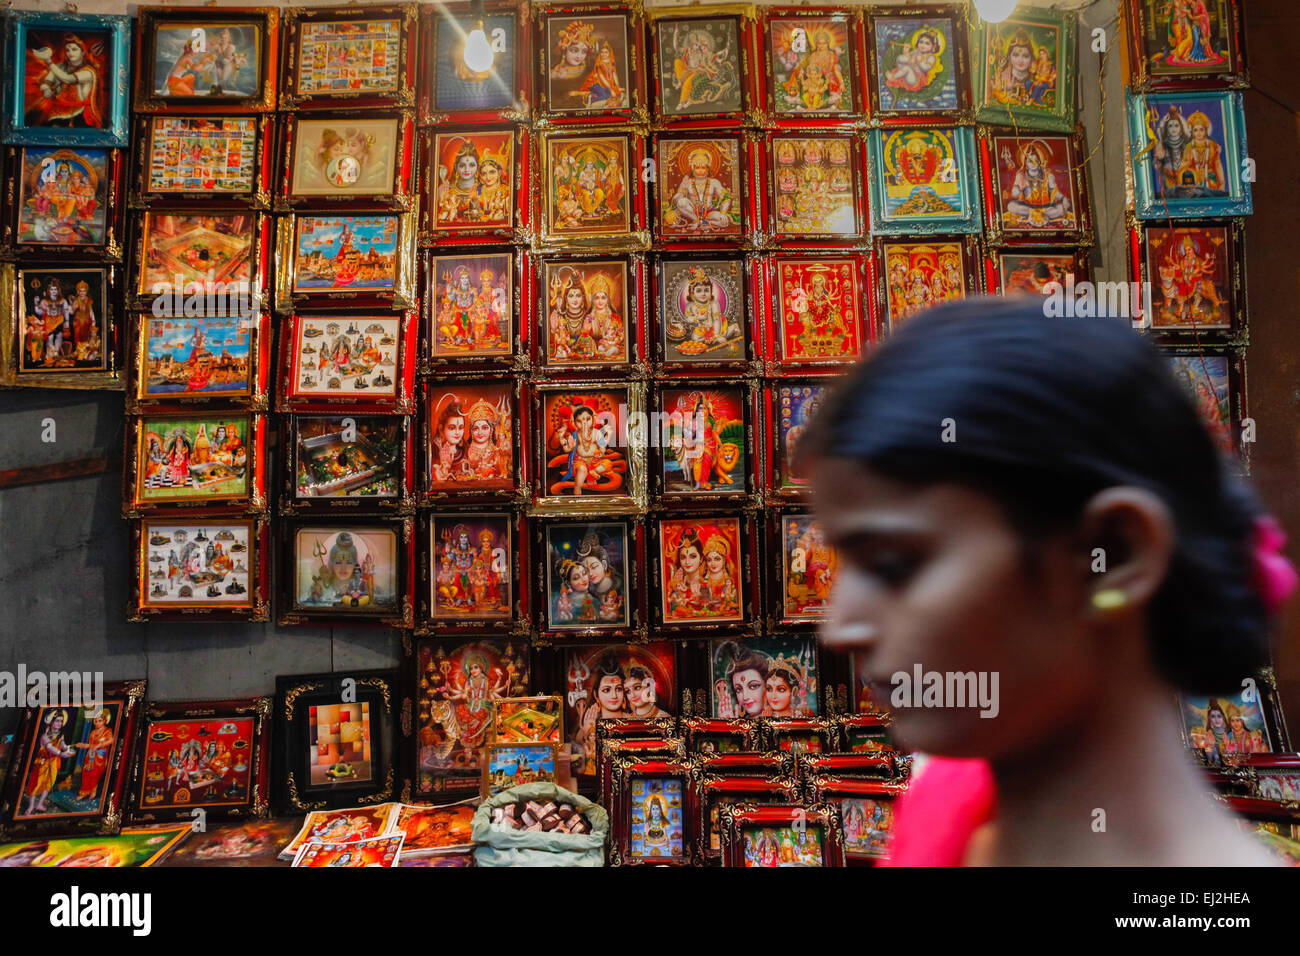 Woman passes in front of gods images shop at one of alleys of Varanasi, India. Stock Photo